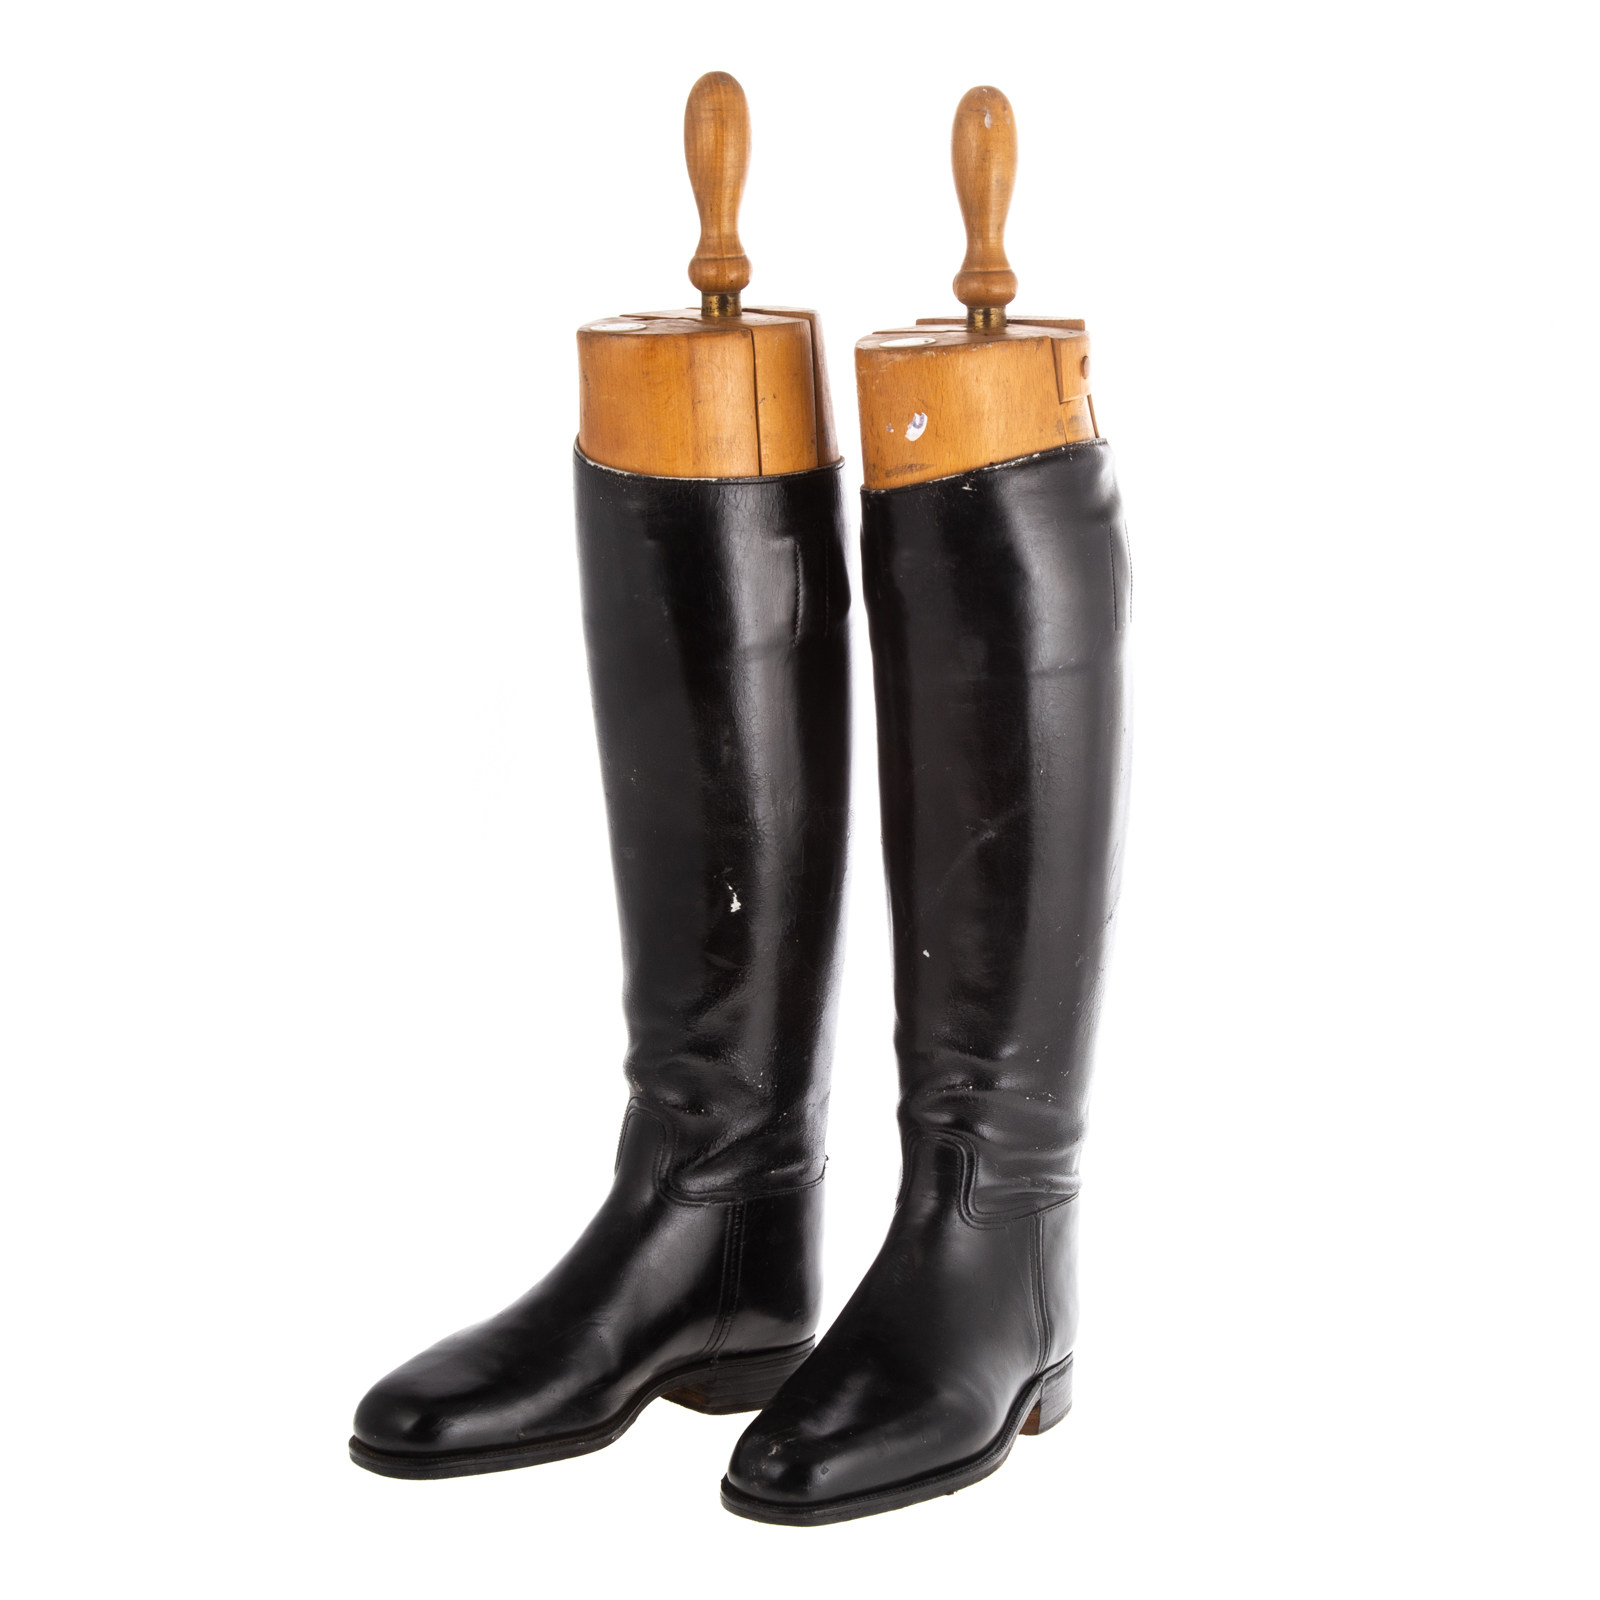 TOM HILL LEATHER RIDING BOOTS 20th 3caf7a